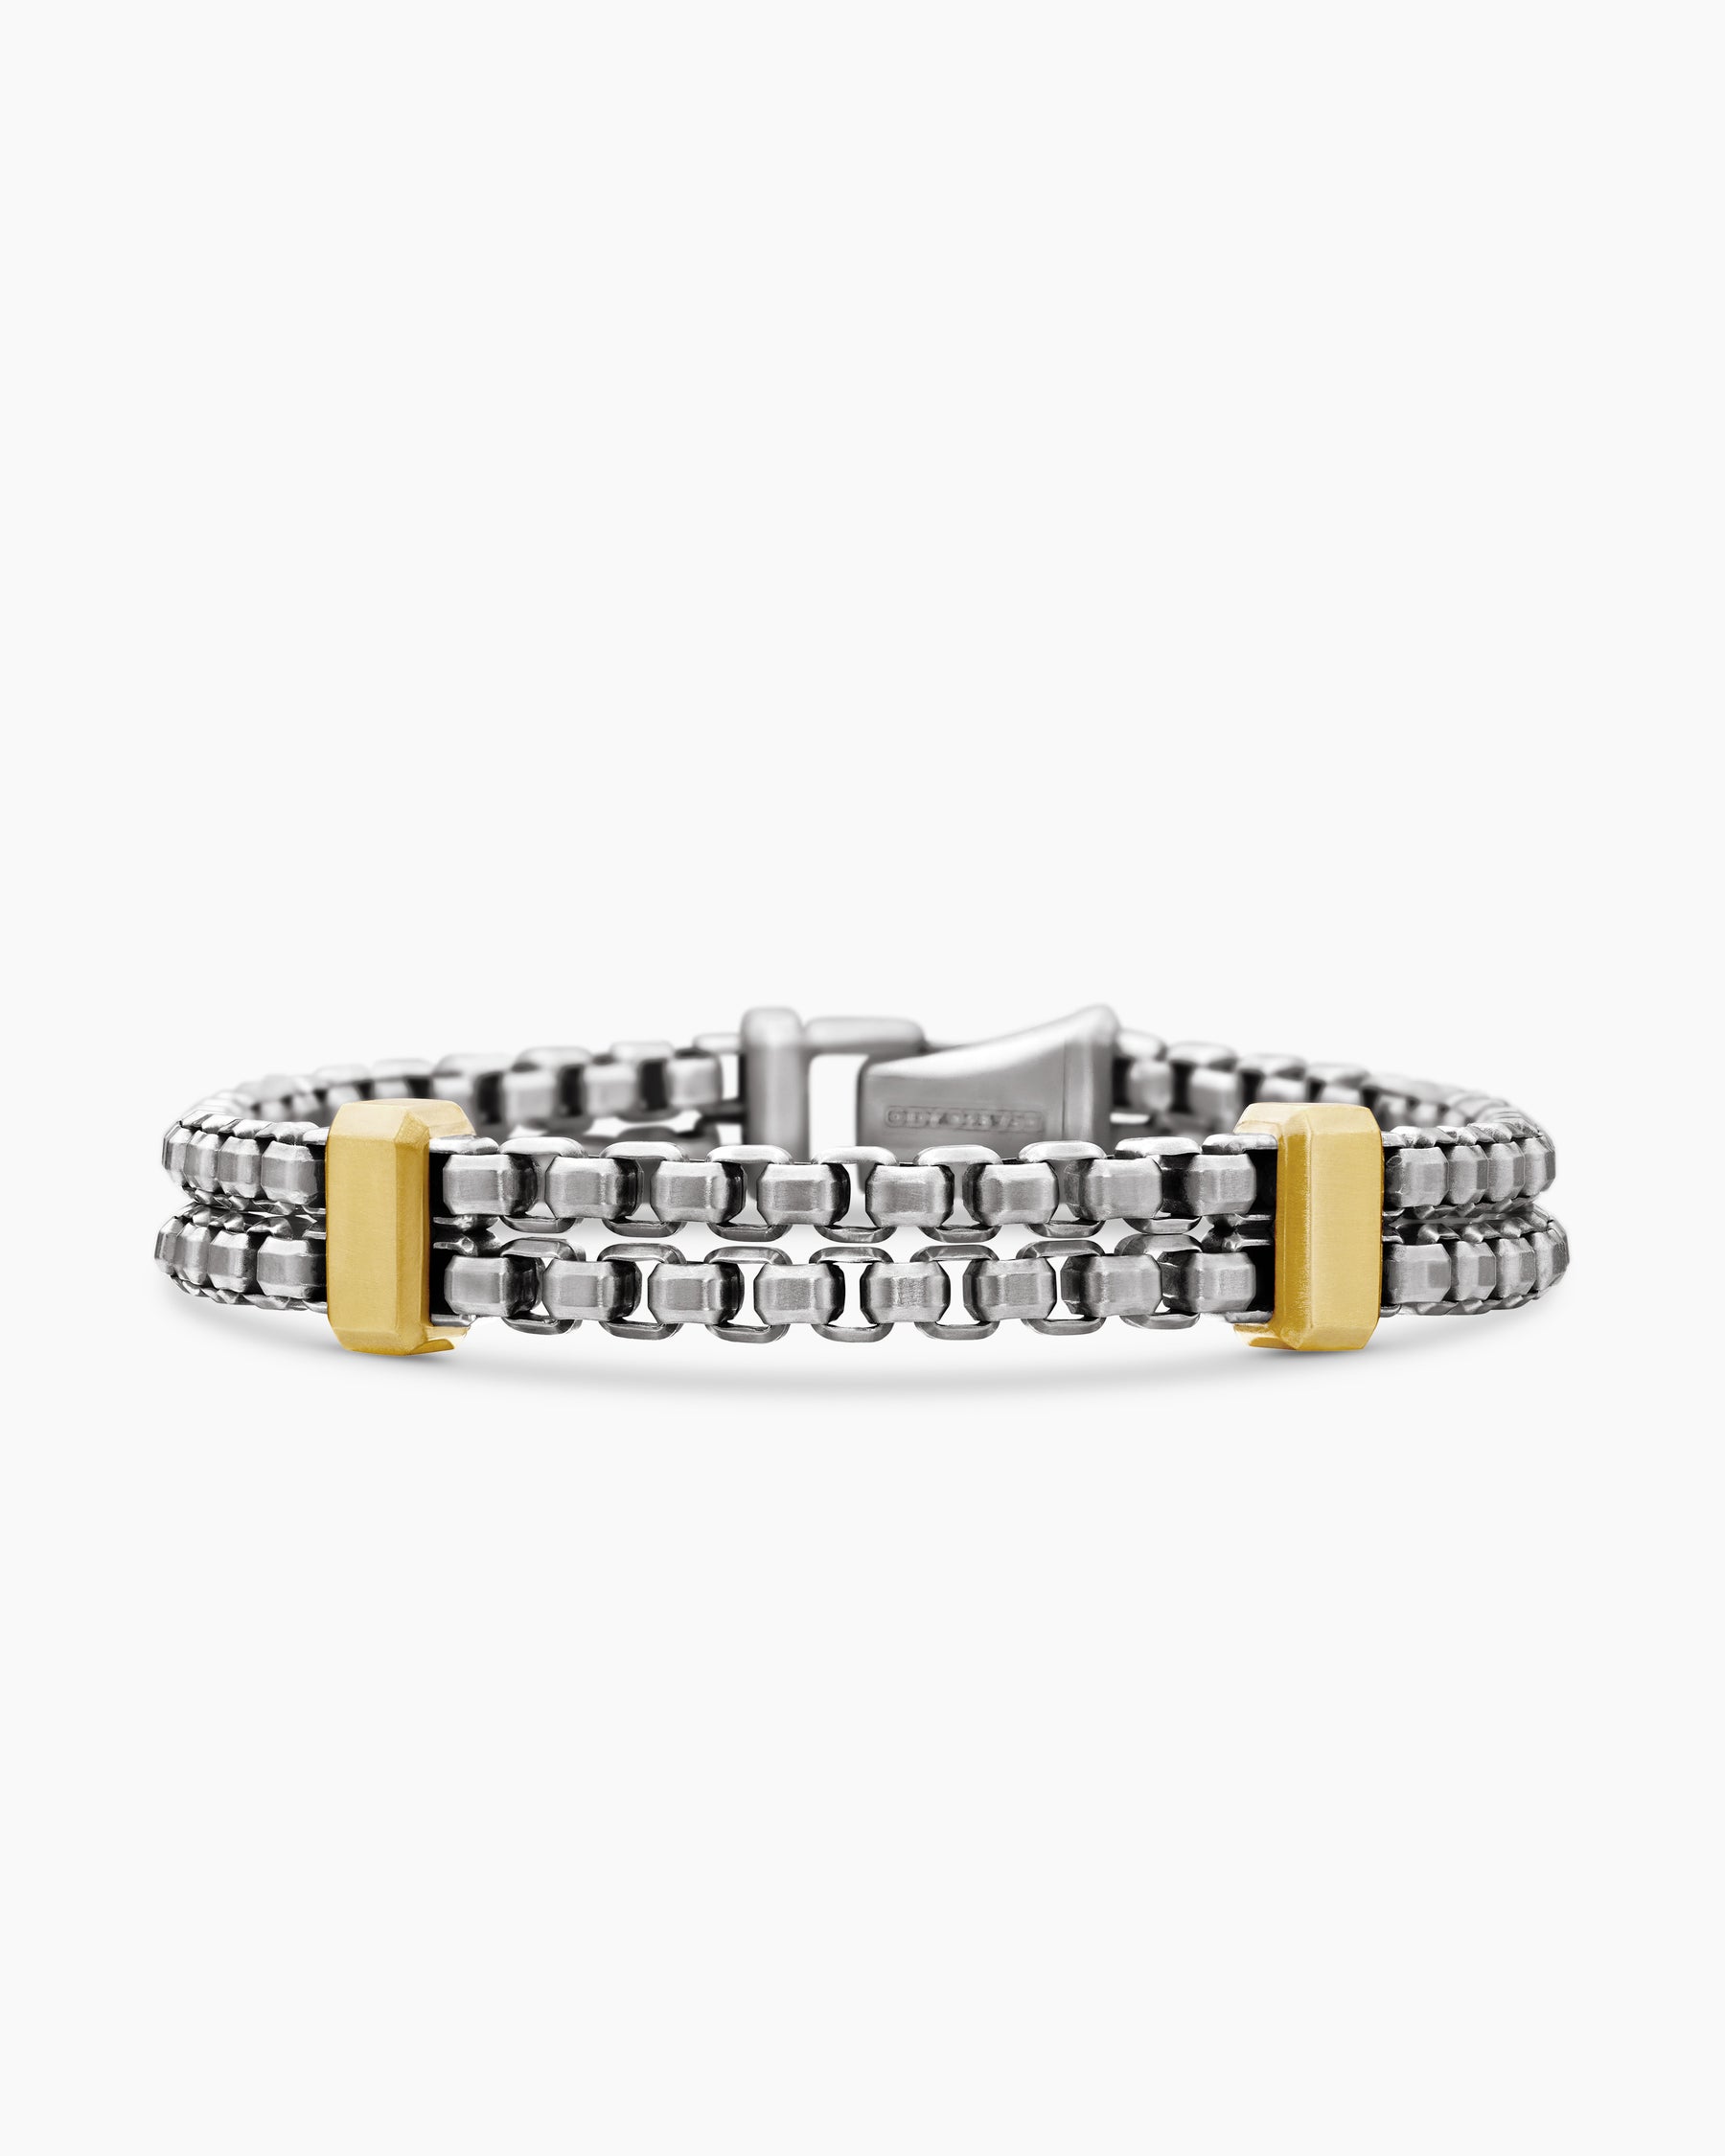 David Yurman Double Box Chain Bracelet in Sterling Silver with 18K Yellow Gold, 10.5mm Men's Size Large